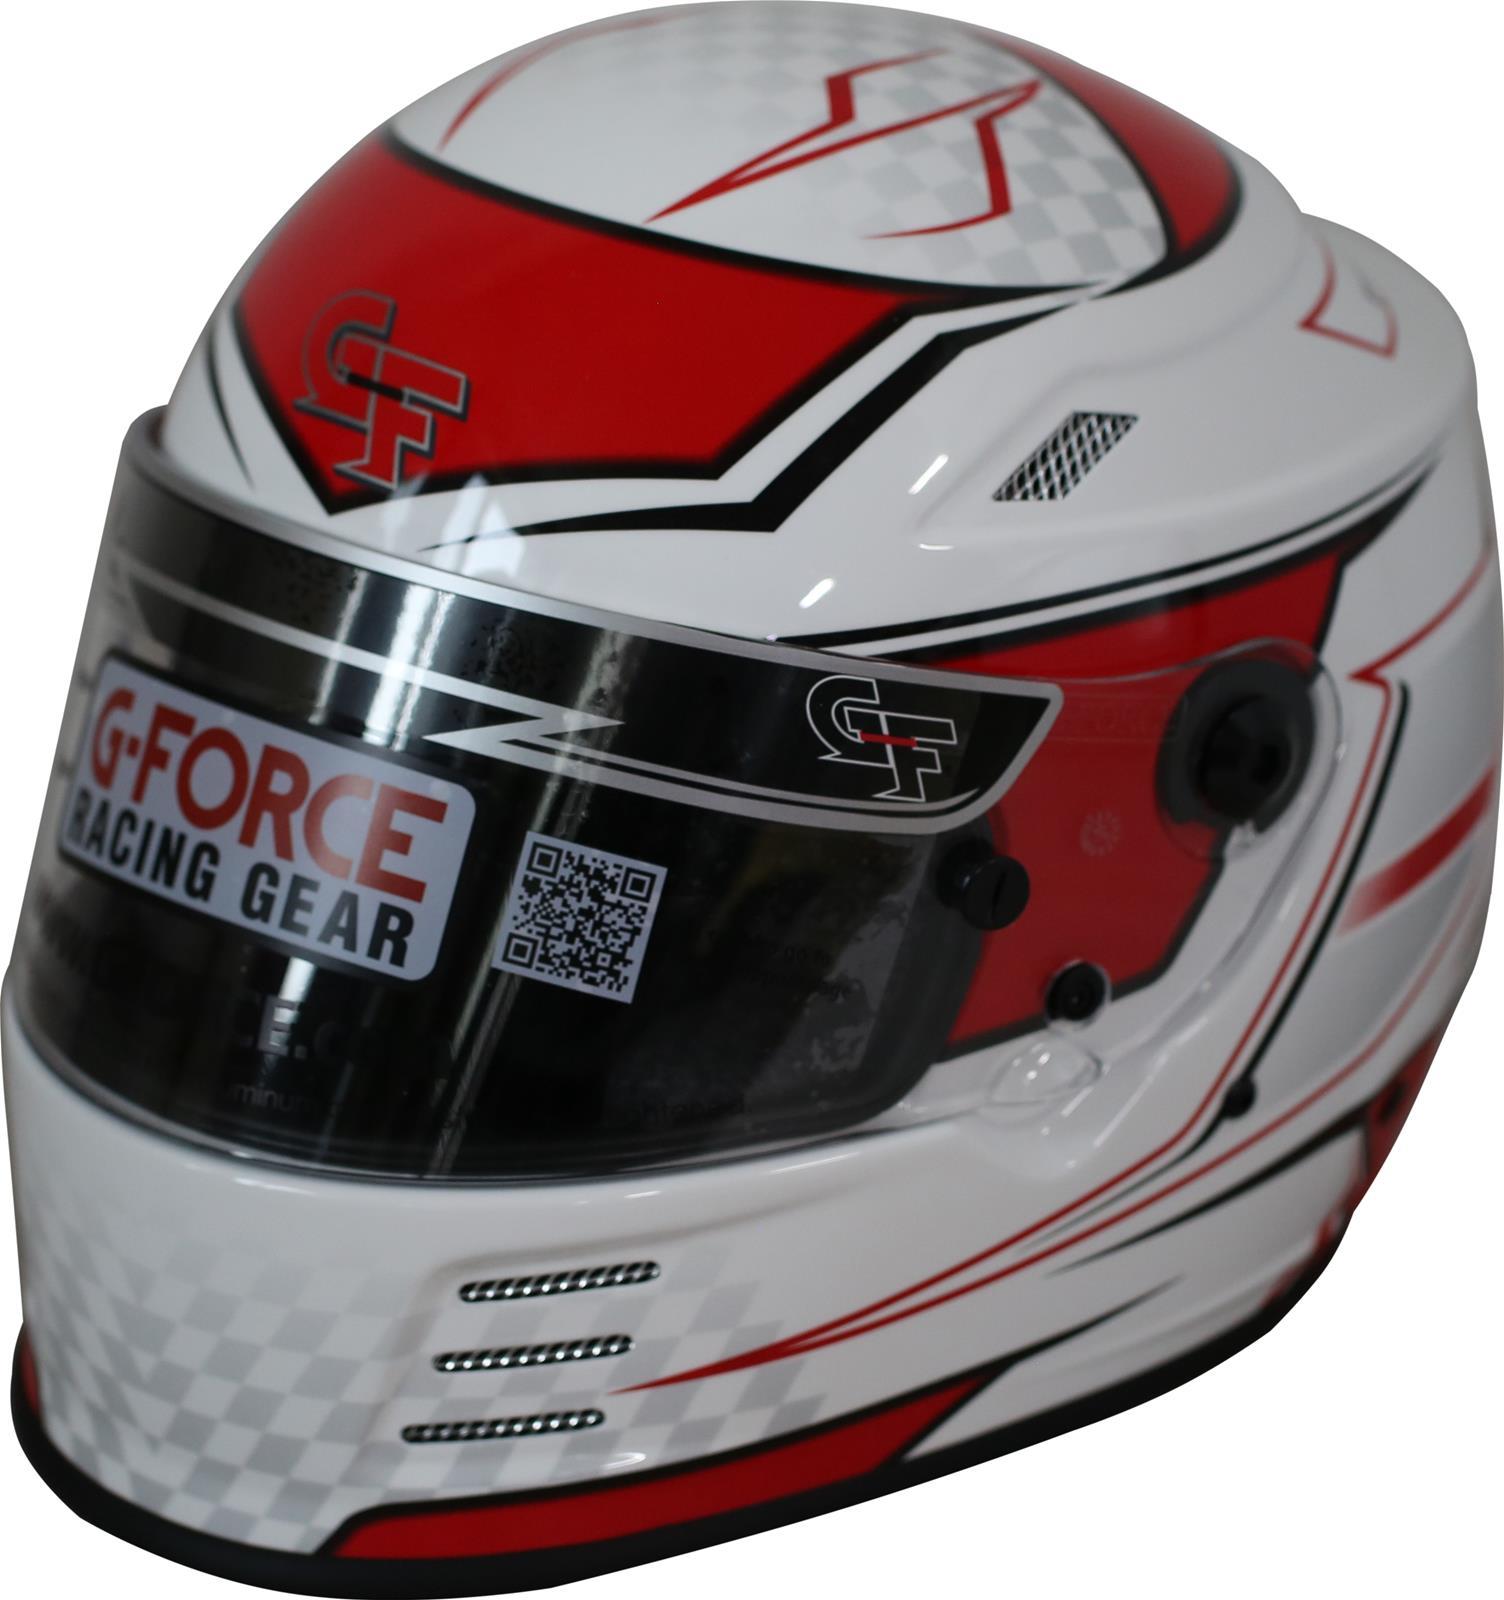 G-Force Racing Gear 13005LRGRD Helmet, Revo Graphics, Full Face, Snell SA2020, Head and Neck Support Ready, White / Red, Large, Each